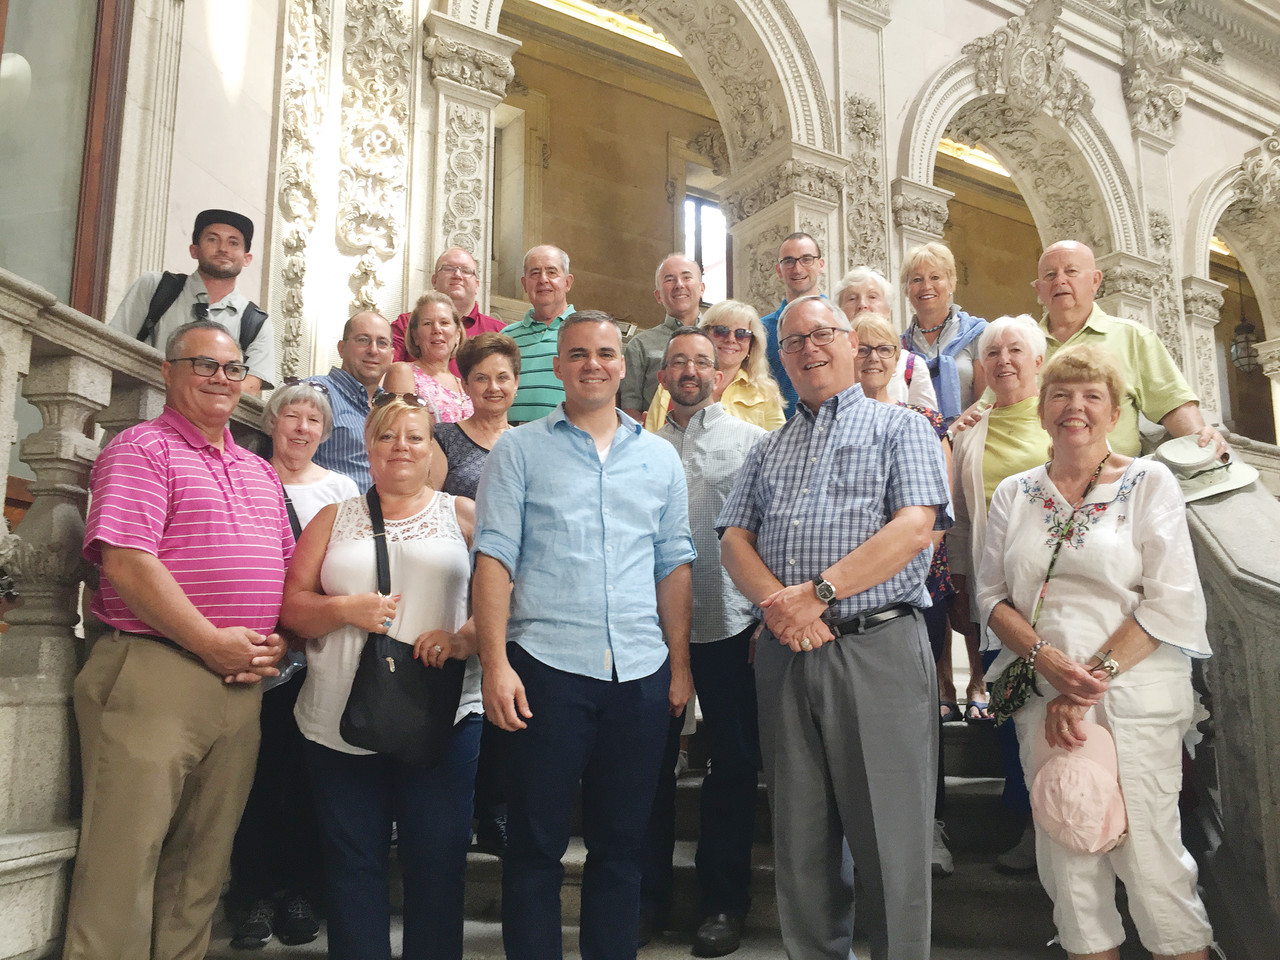 From August 10-19, a diocesan-sponsored Pilgrimage brought Bishop Thomas J. Tobin, local priests, seminarians and a small group of faith-filled Catholics from Rhode Island to witness first hand the holy sites of Portugal.  At left, in an act of devotion, pilgrims process on their knees for long distances throughout the shrine.